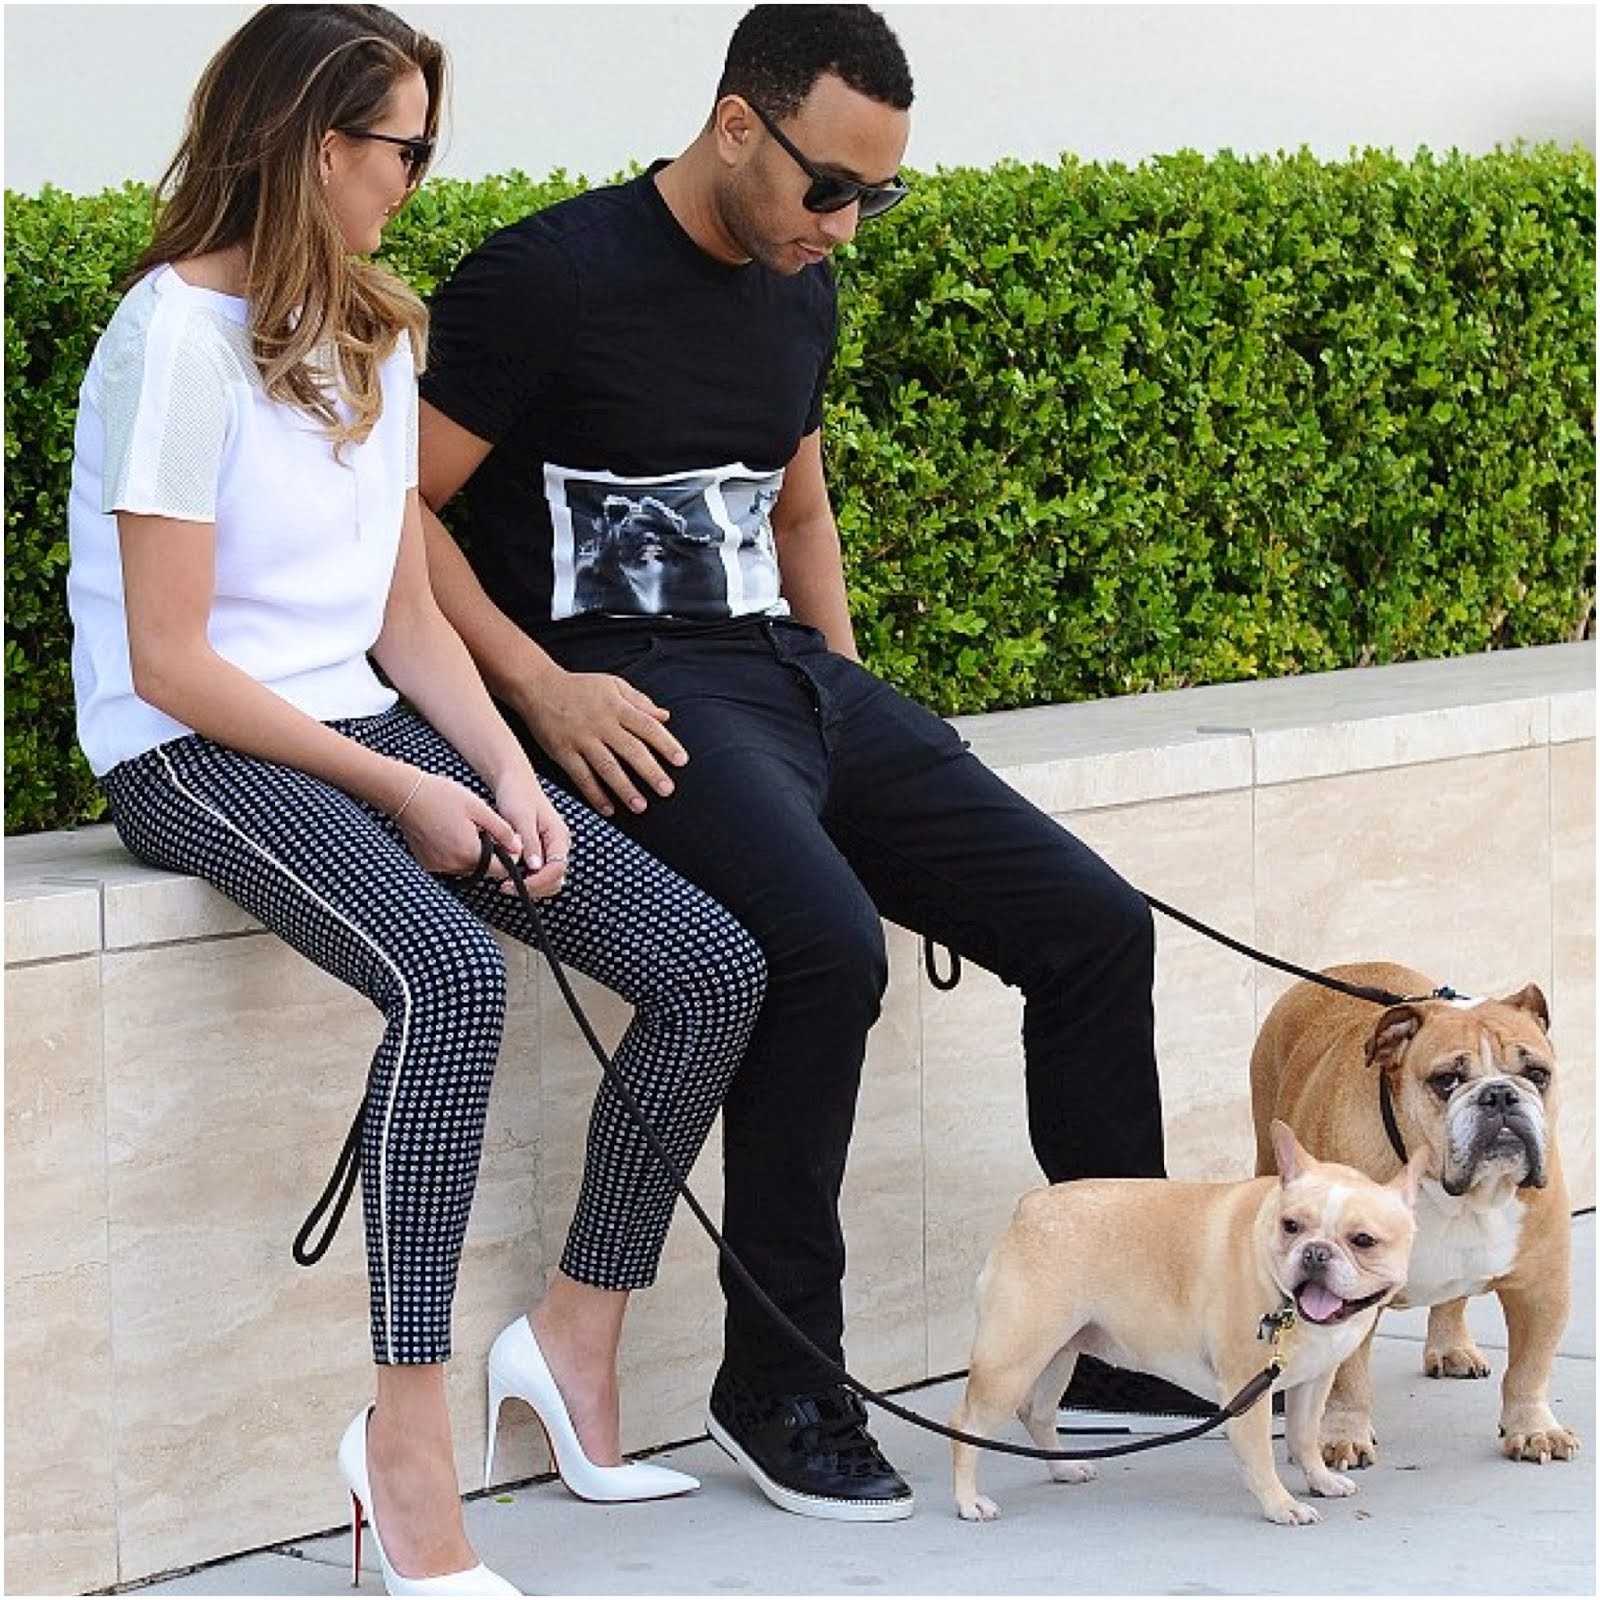 John Legend & Christy Teigen sitting at the park with their English Bulldog and french bulldog